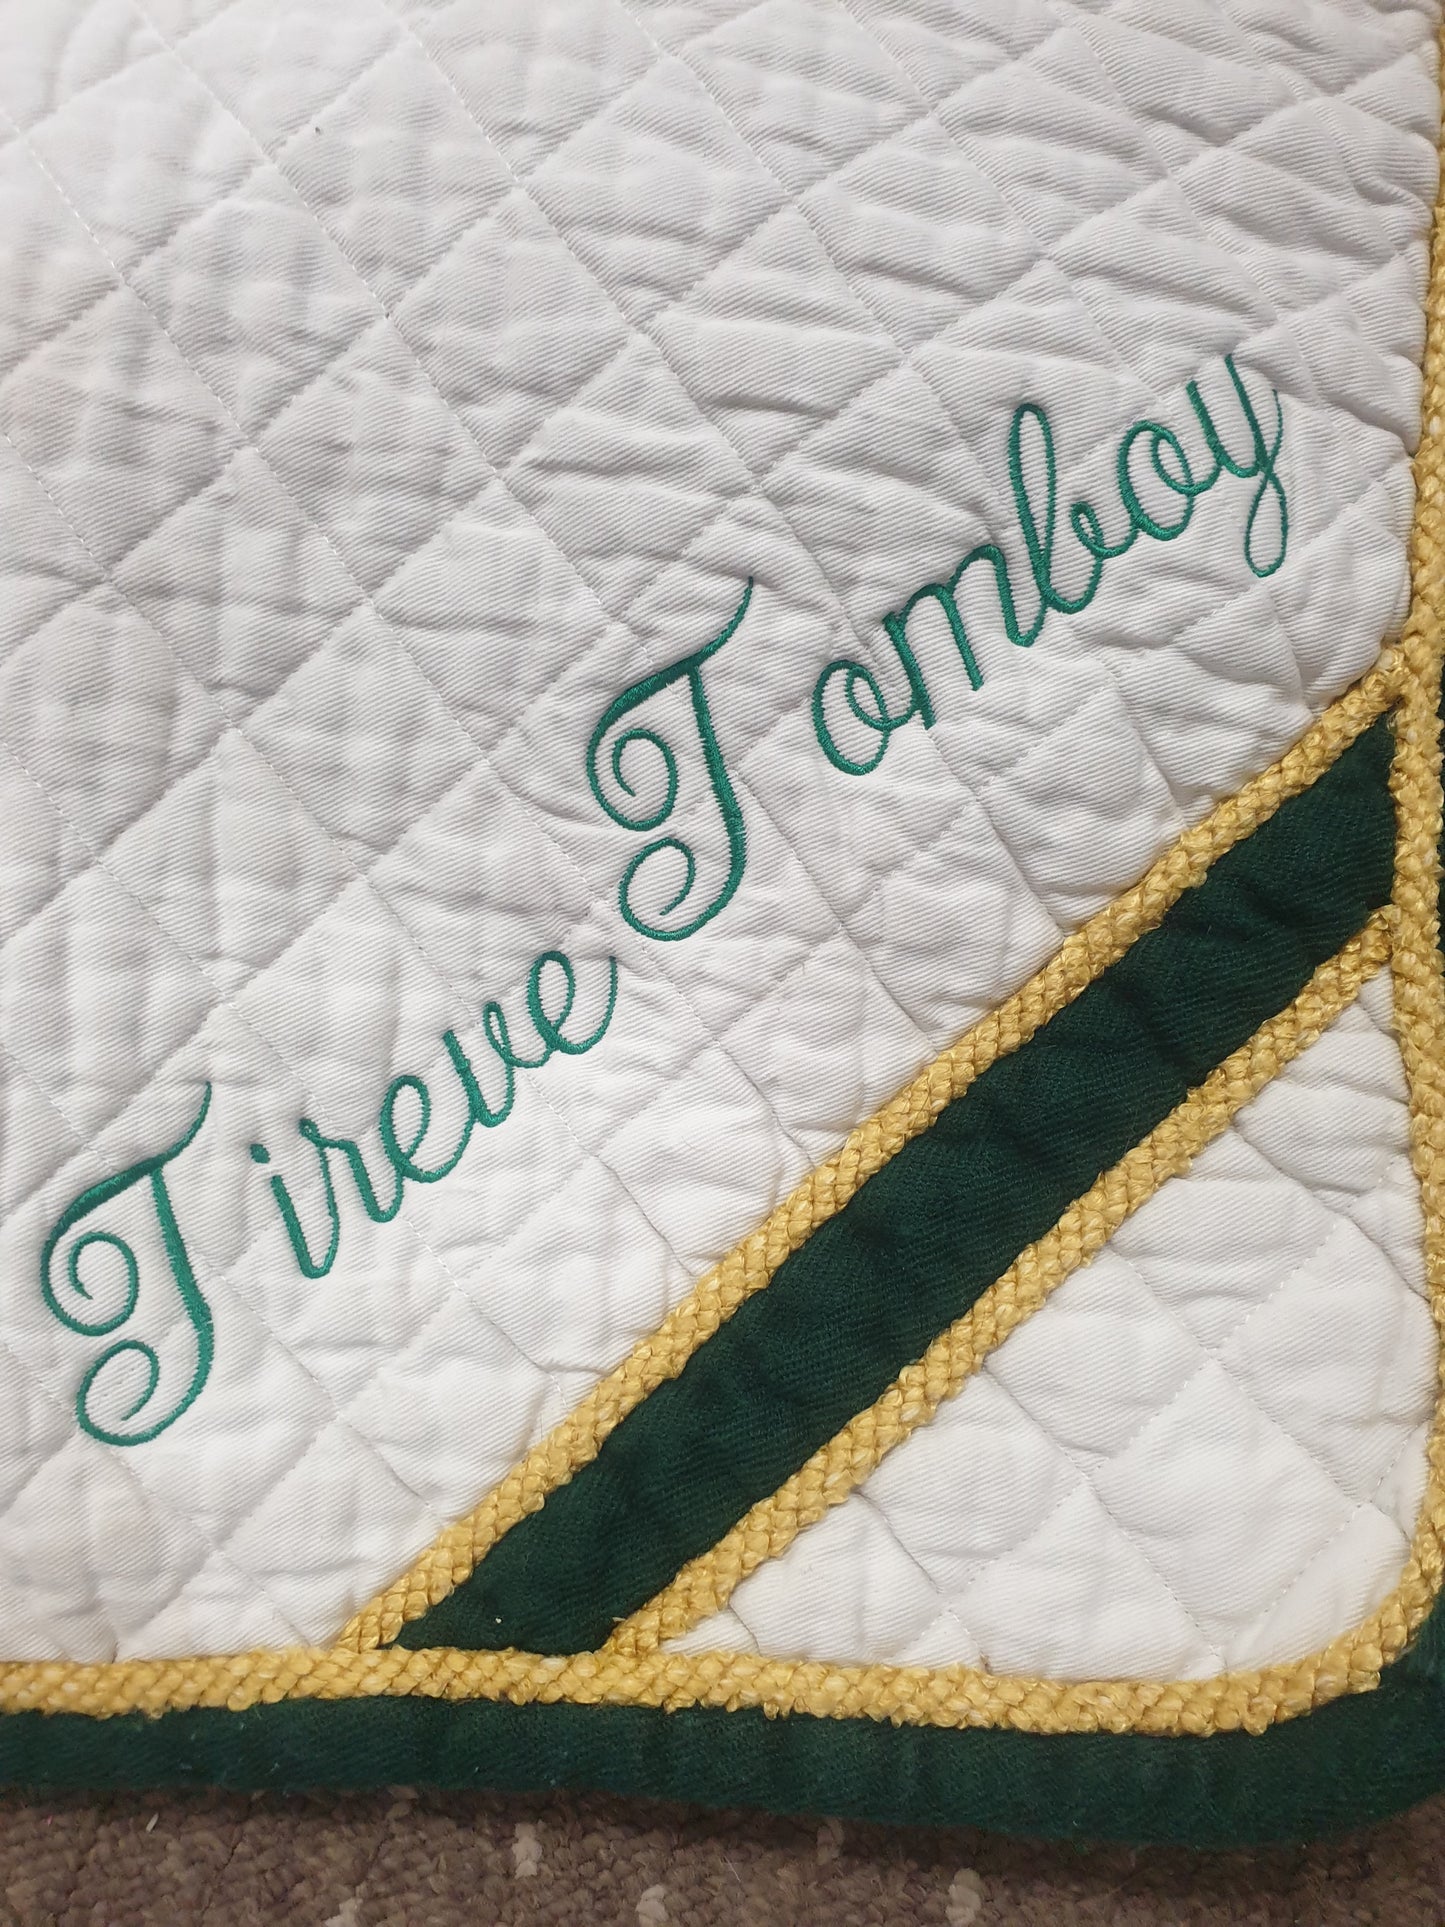 White and green full Saddle cloth FREE POSTAGE 🟢